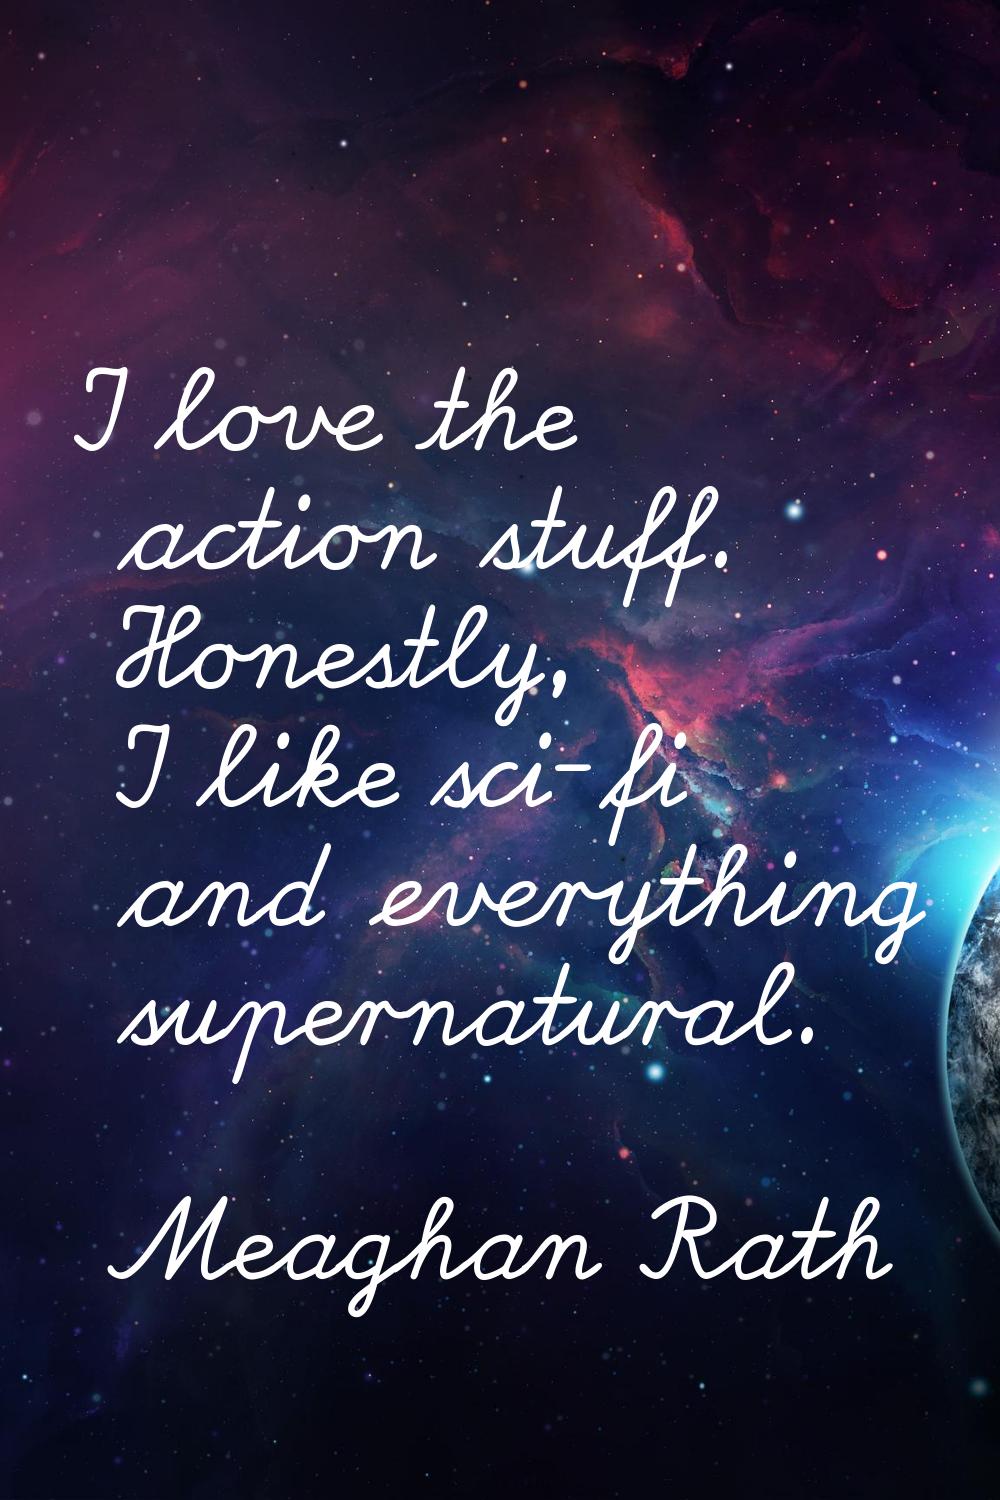 I love the action stuff. Honestly, I like sci-fi and everything supernatural.